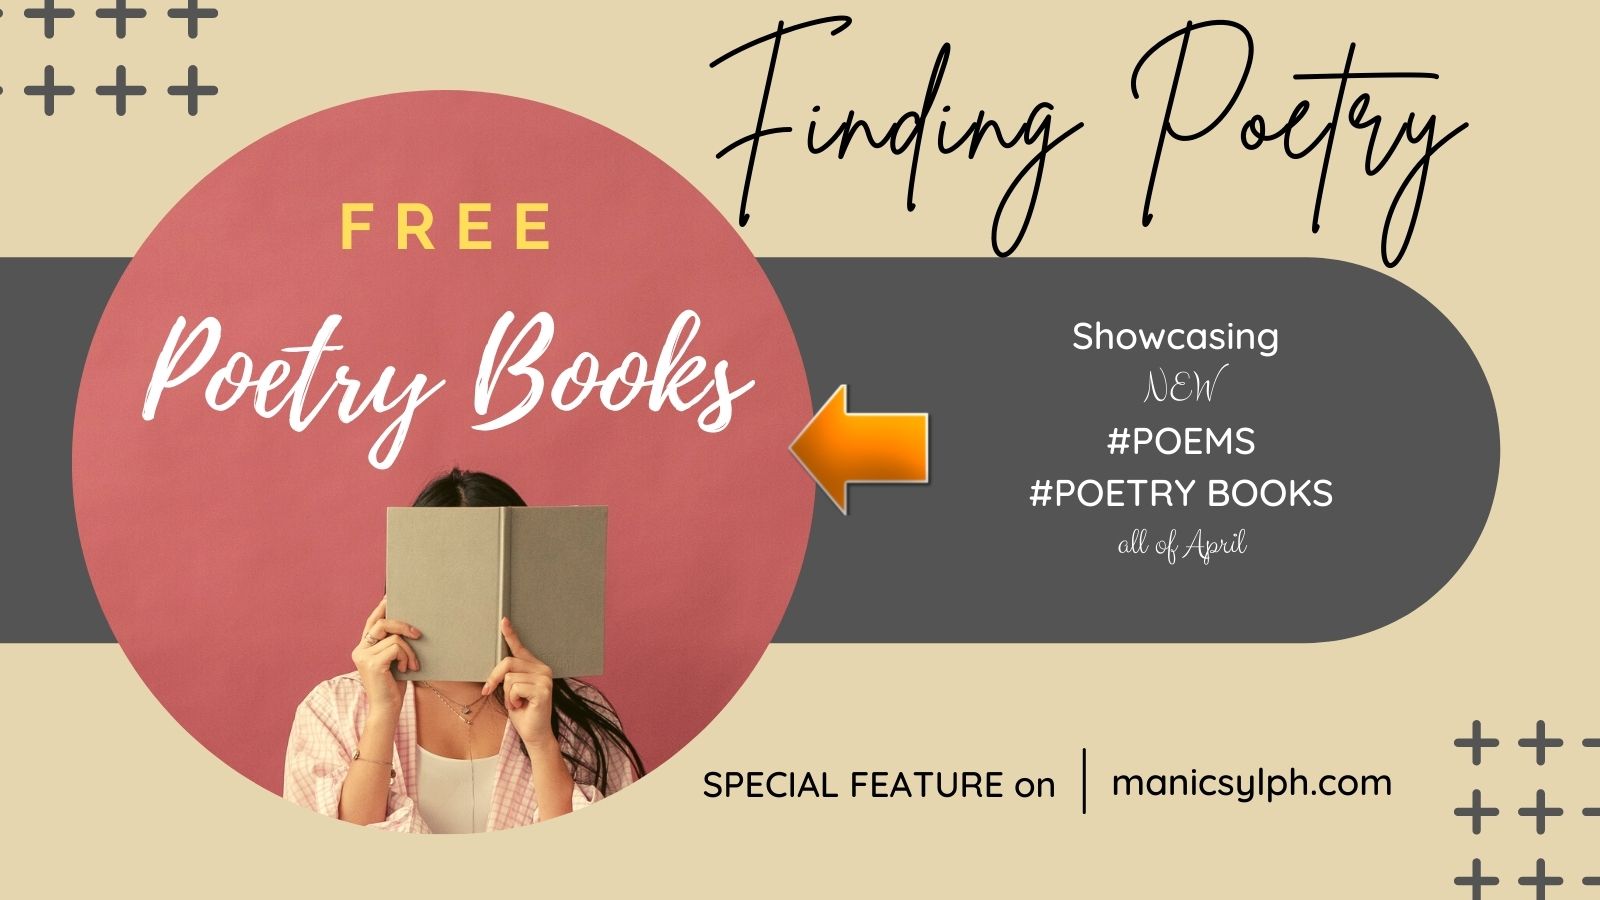 Finding Poetry: Free Books